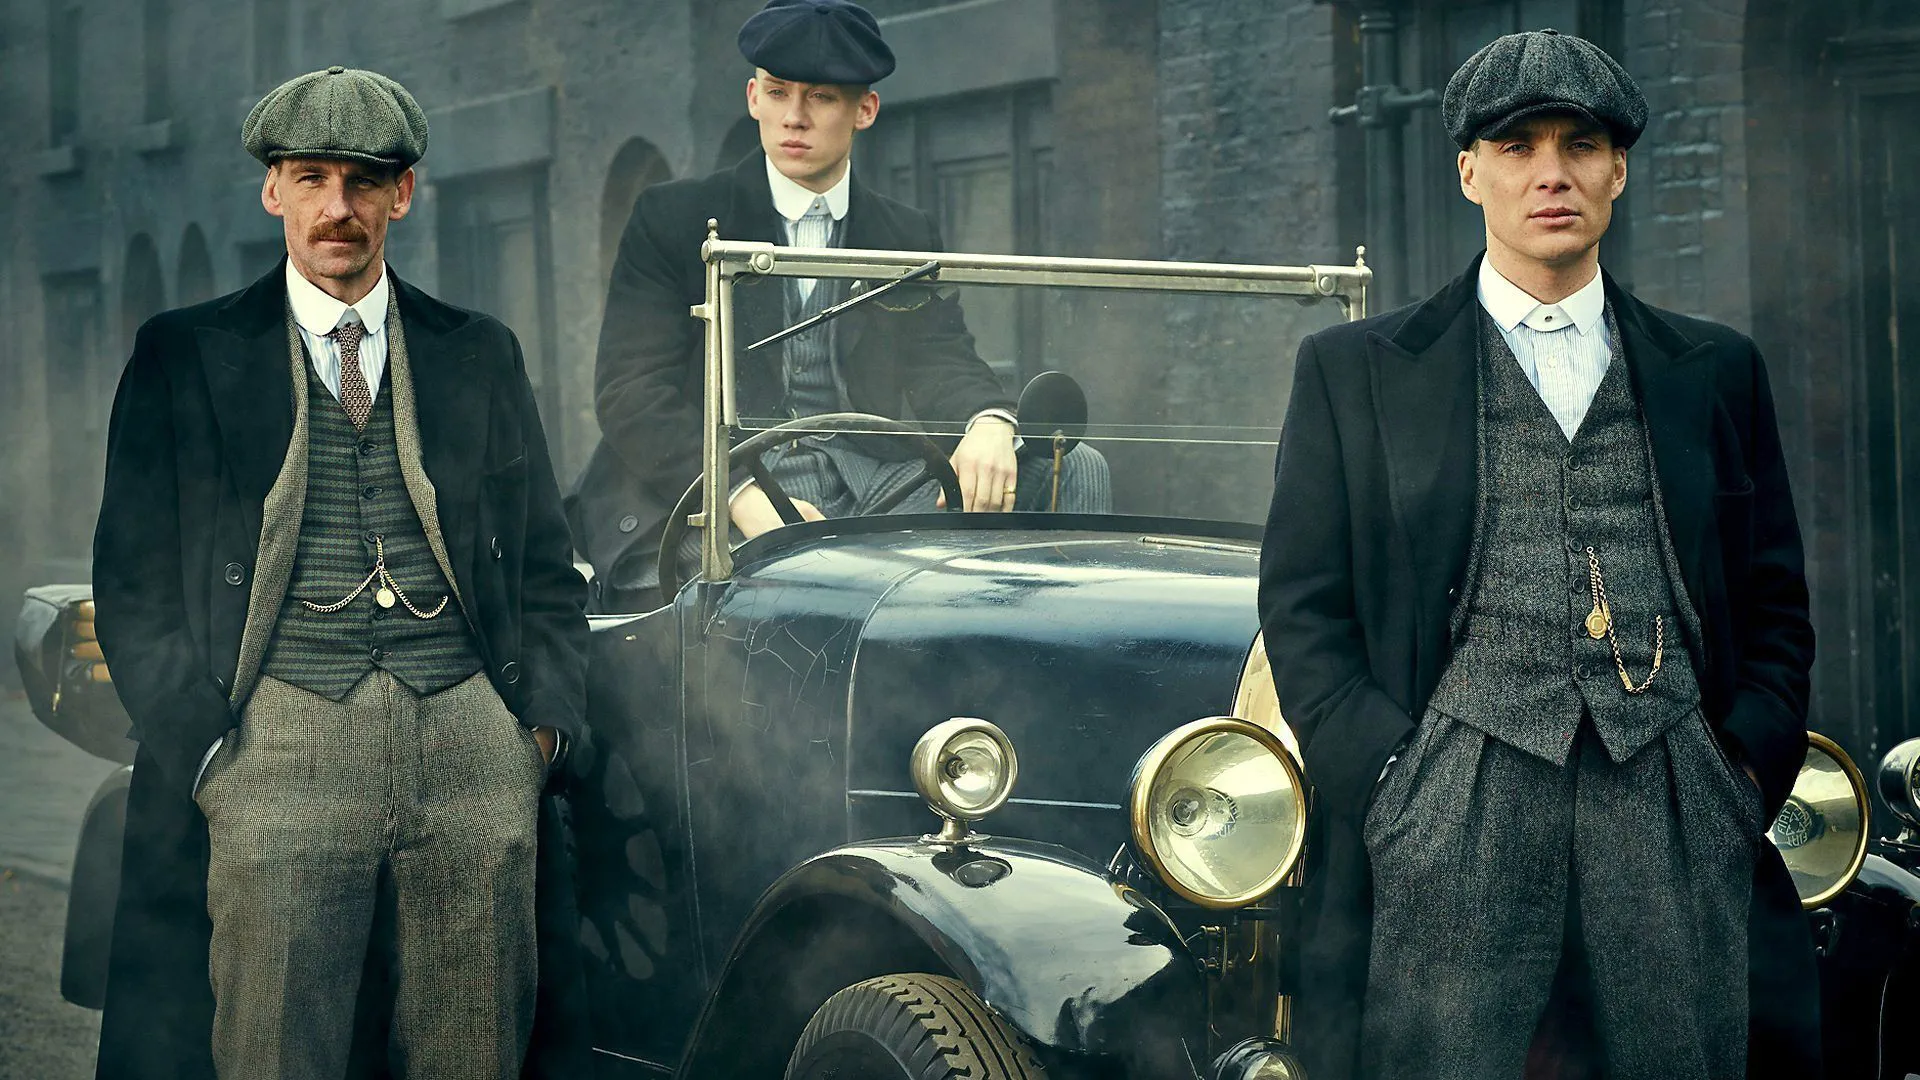 Peaky Blinders' Big Screen Debut: Inside Scoop on the Upcoming Movie and Spinoffs